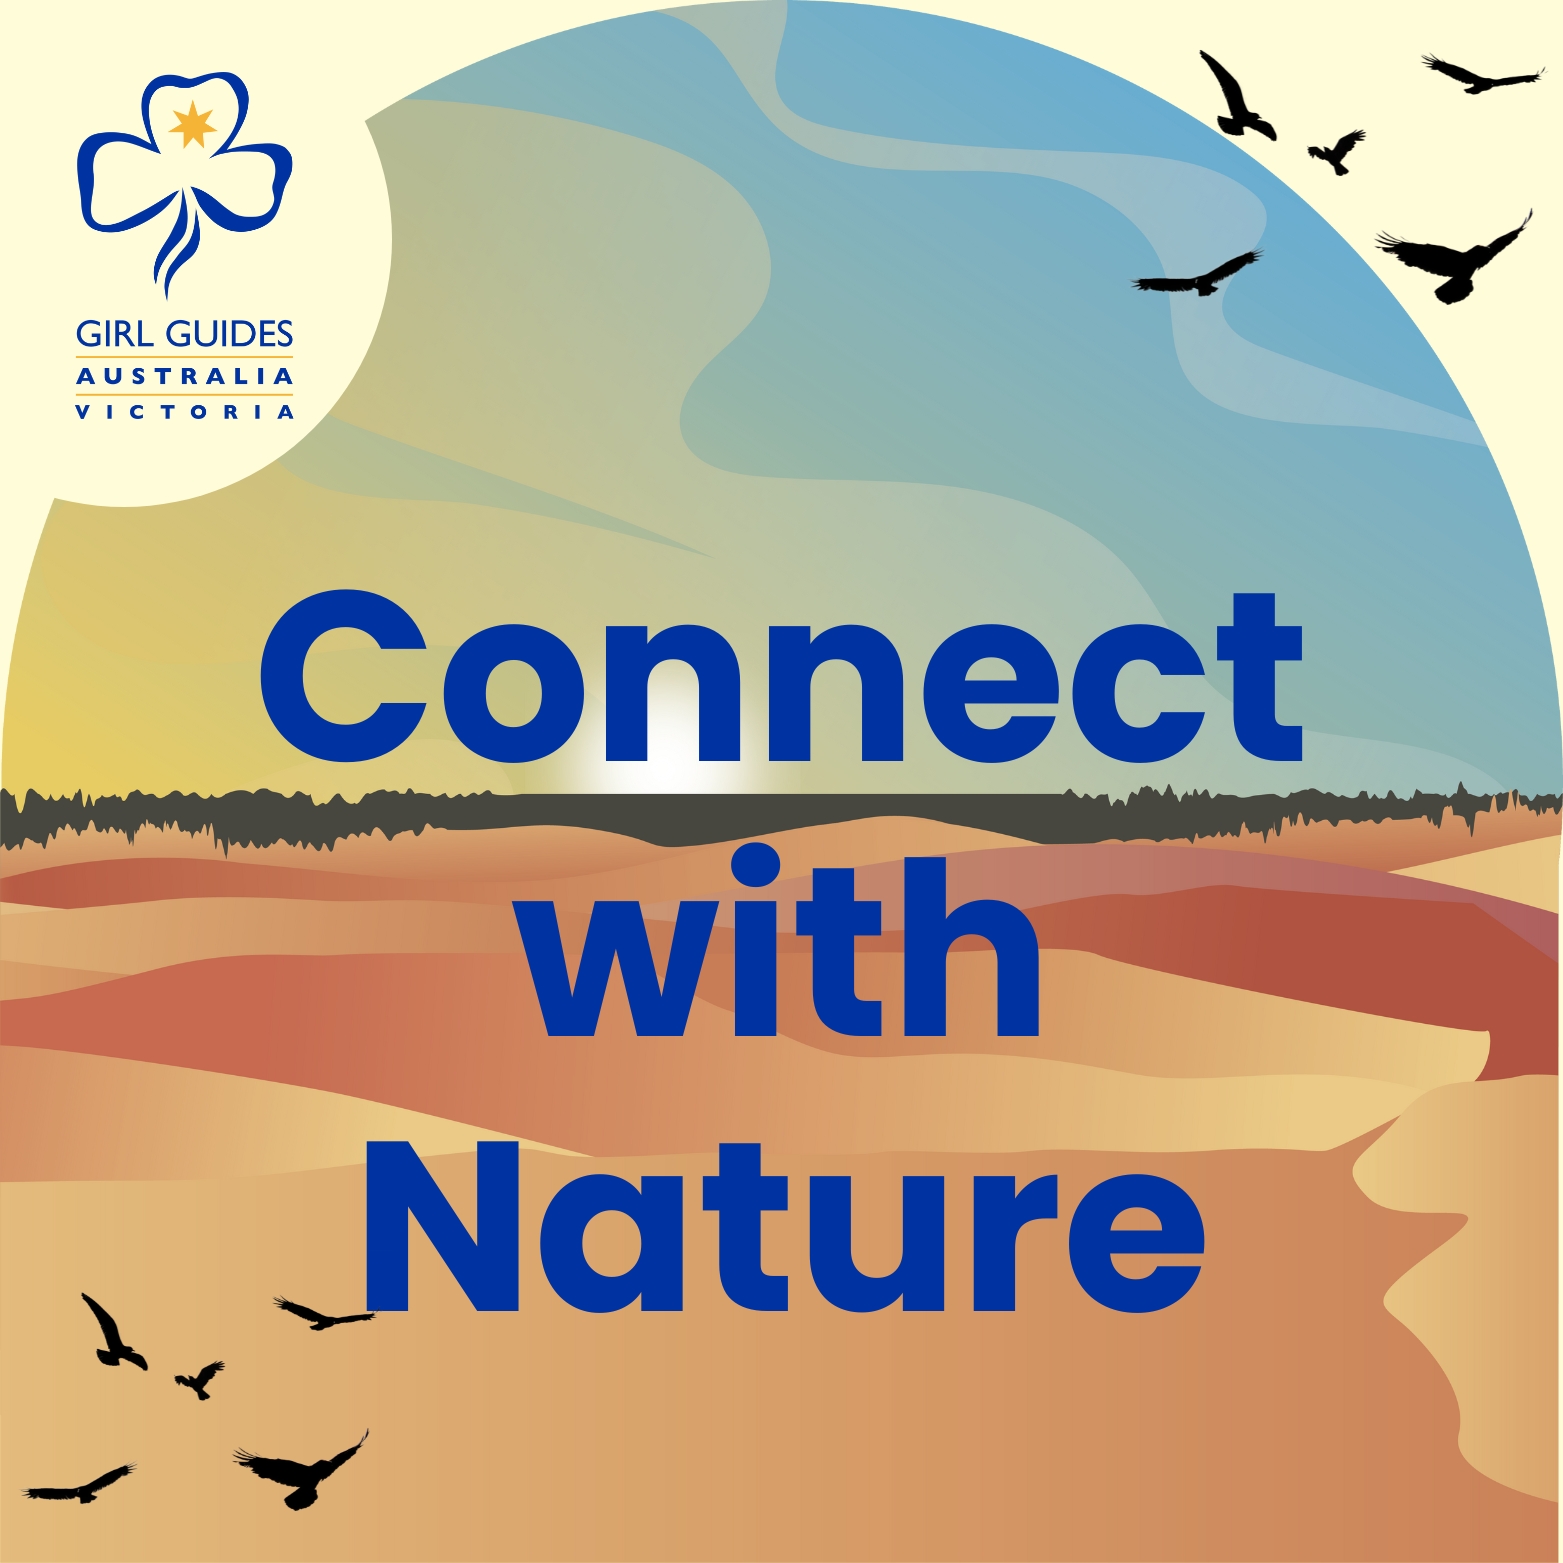 Connect with Nature